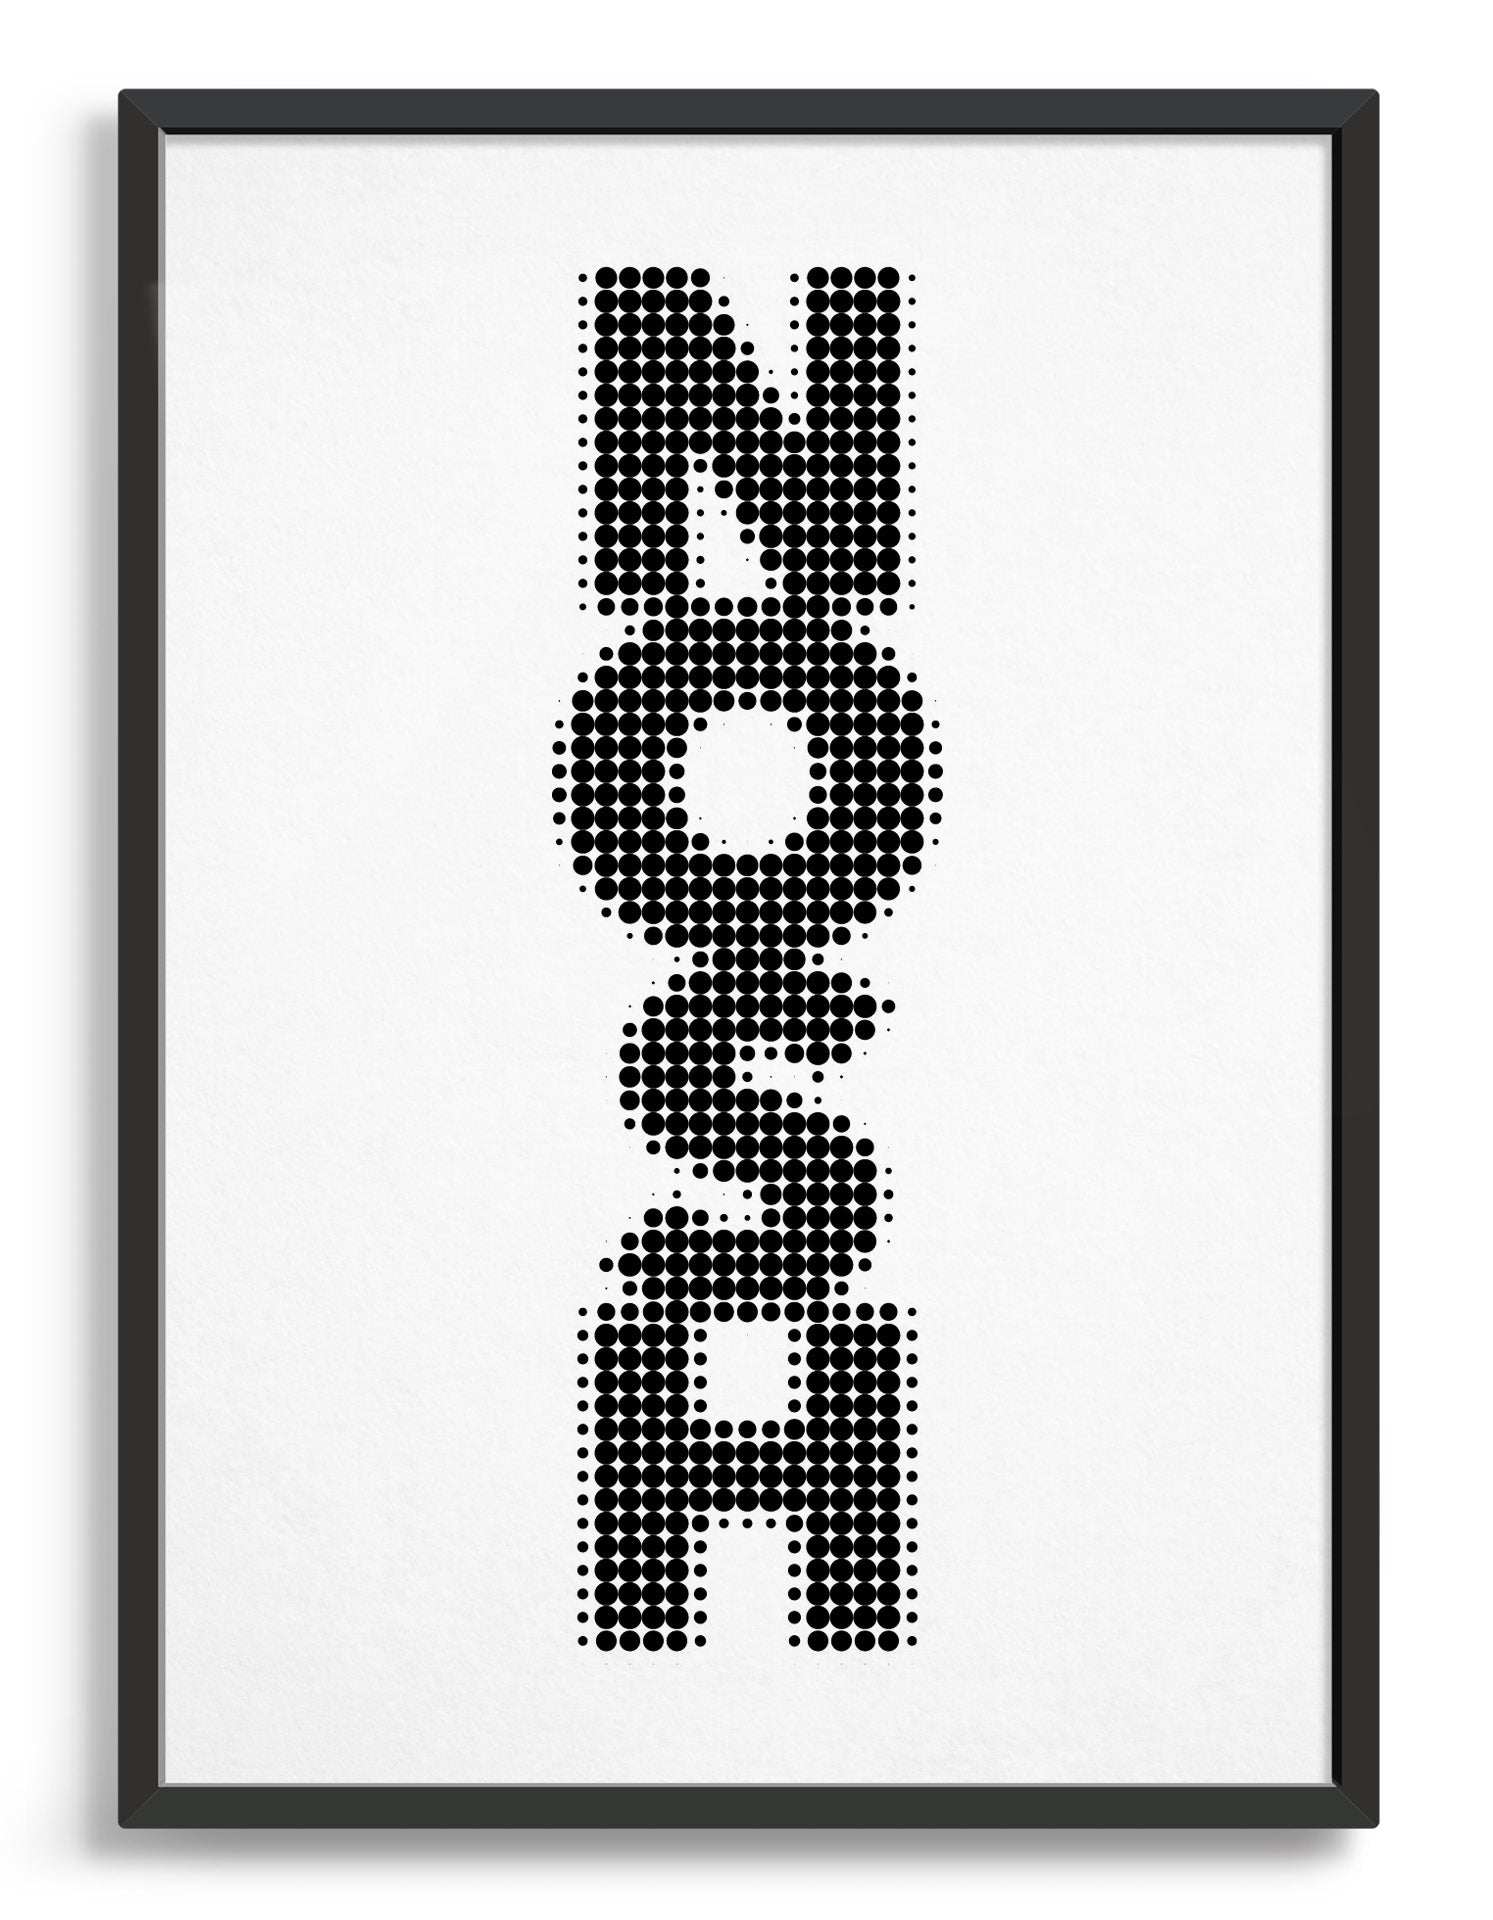 Framed typography art print of the word NOSH written vertically in black text on a white background